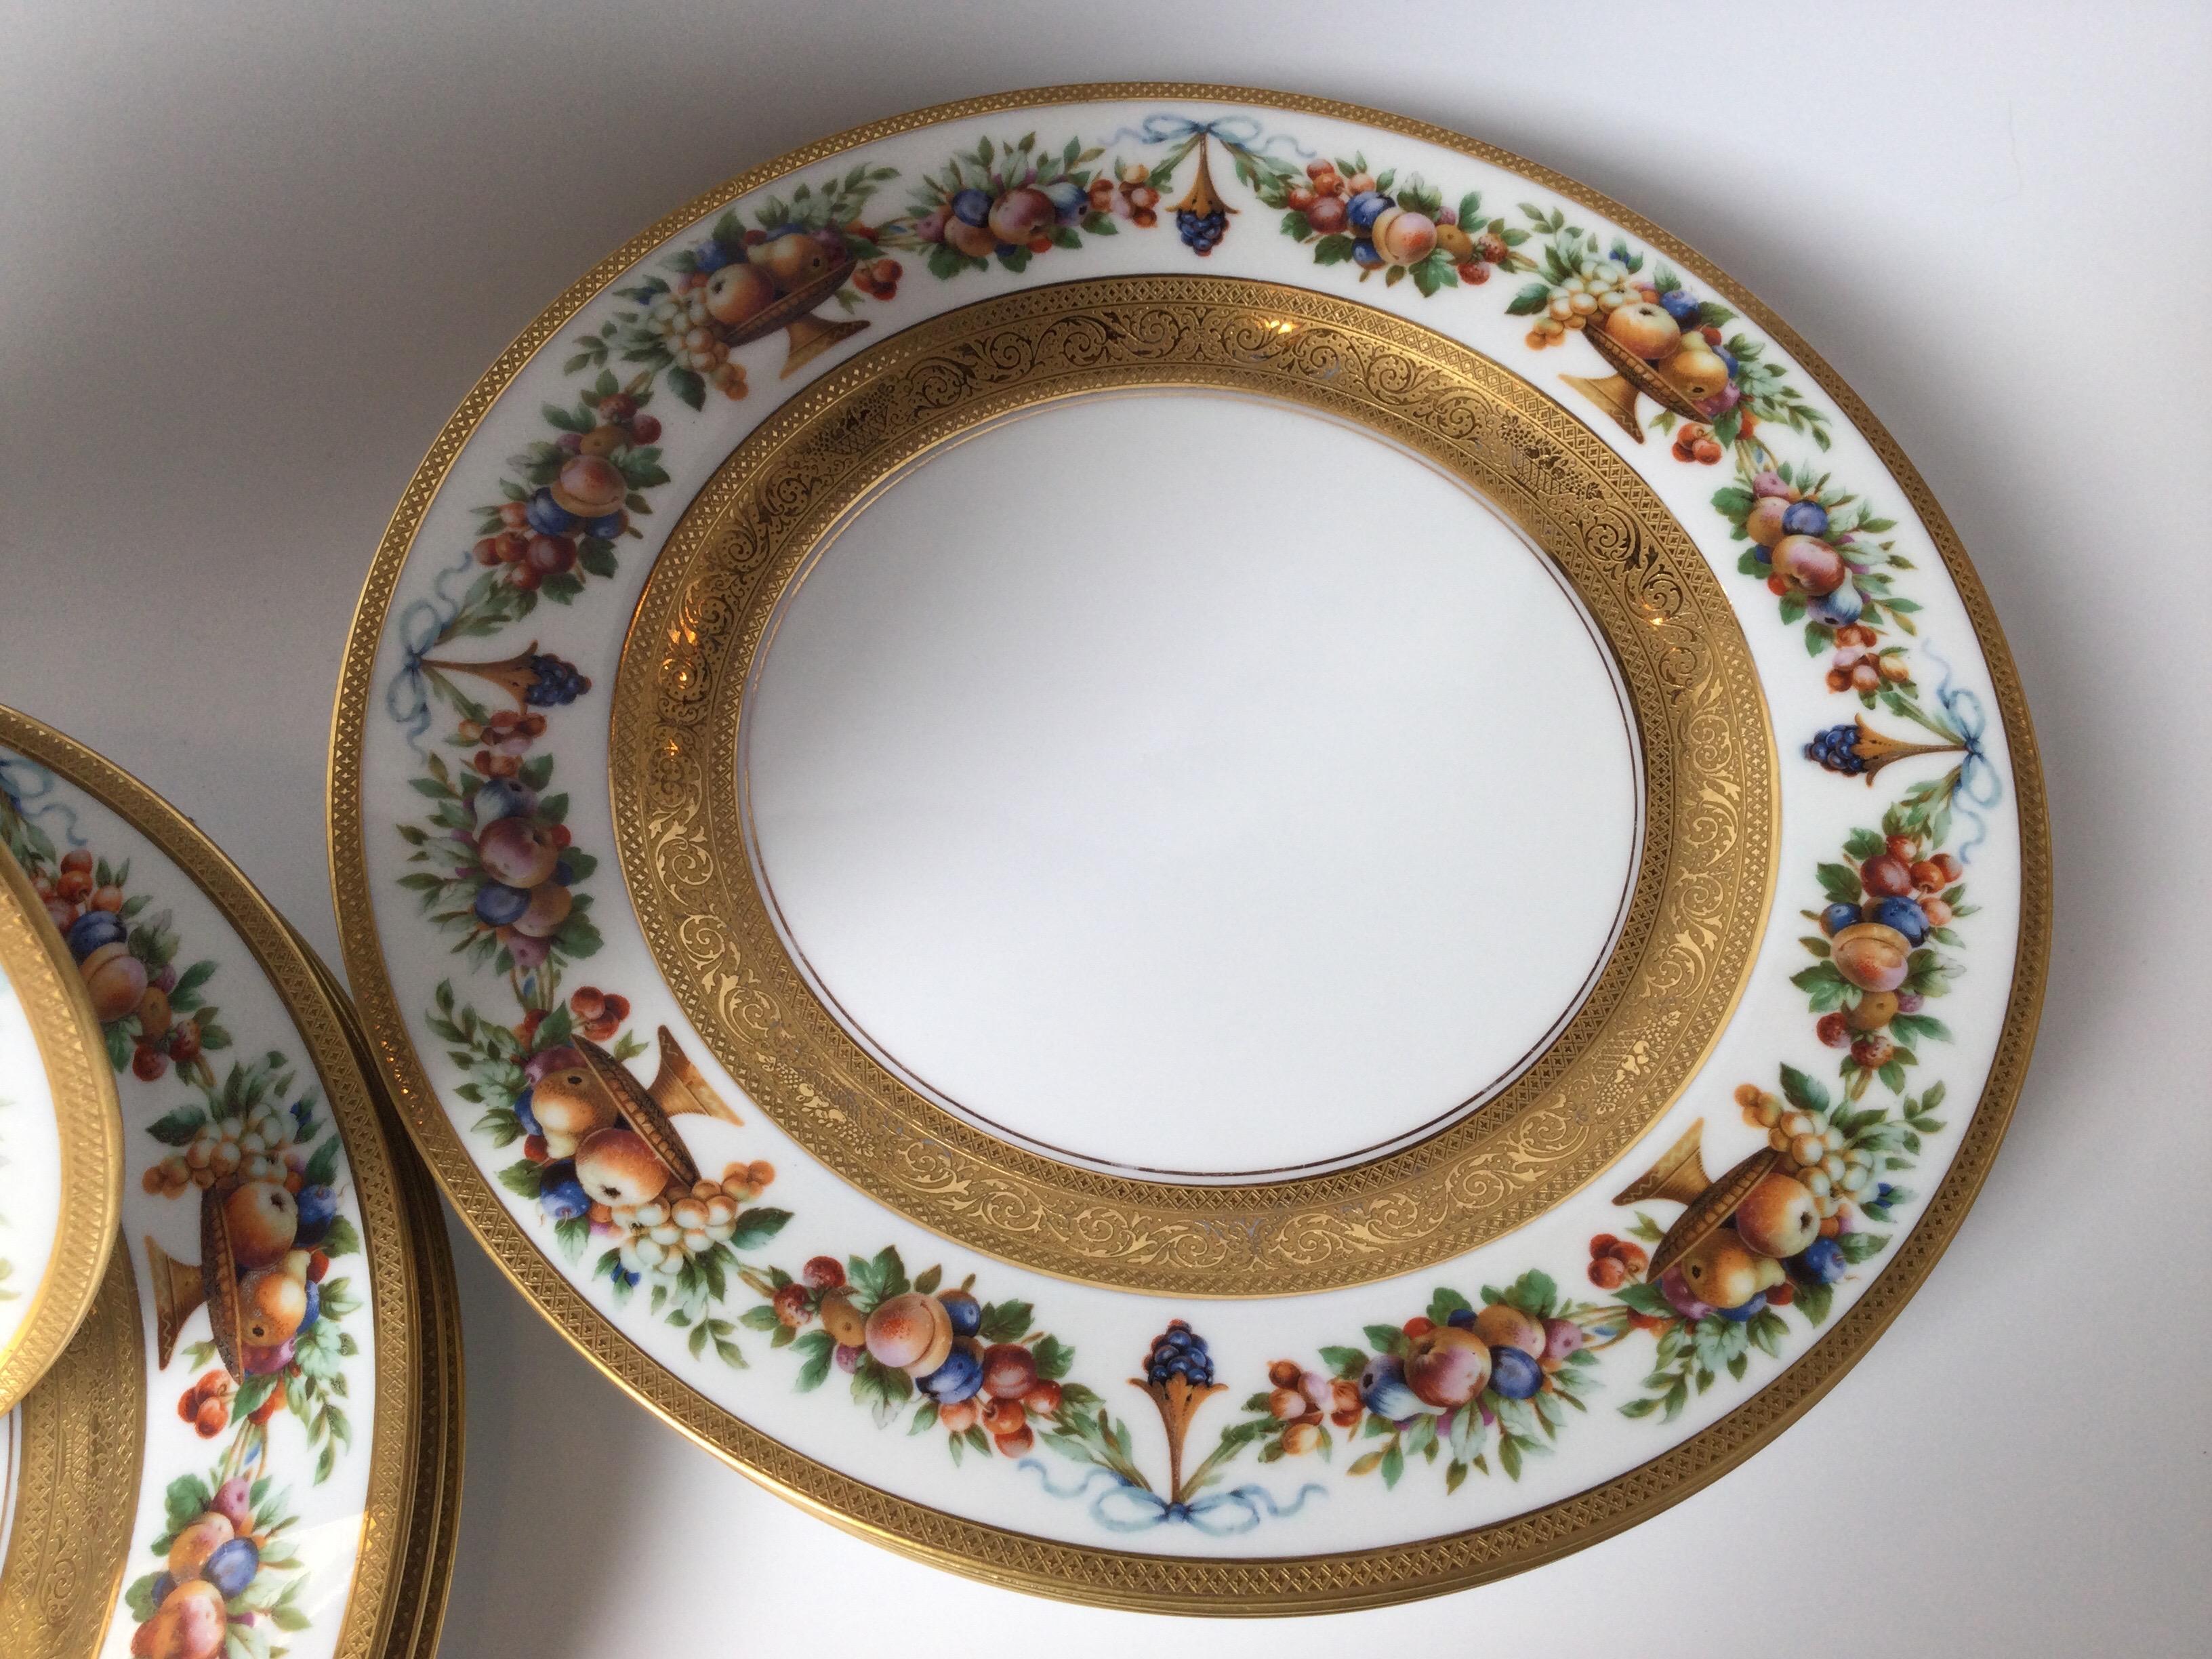 Set of 12 Gilt Banded Service Dinner Plates with Fruit Borders 1